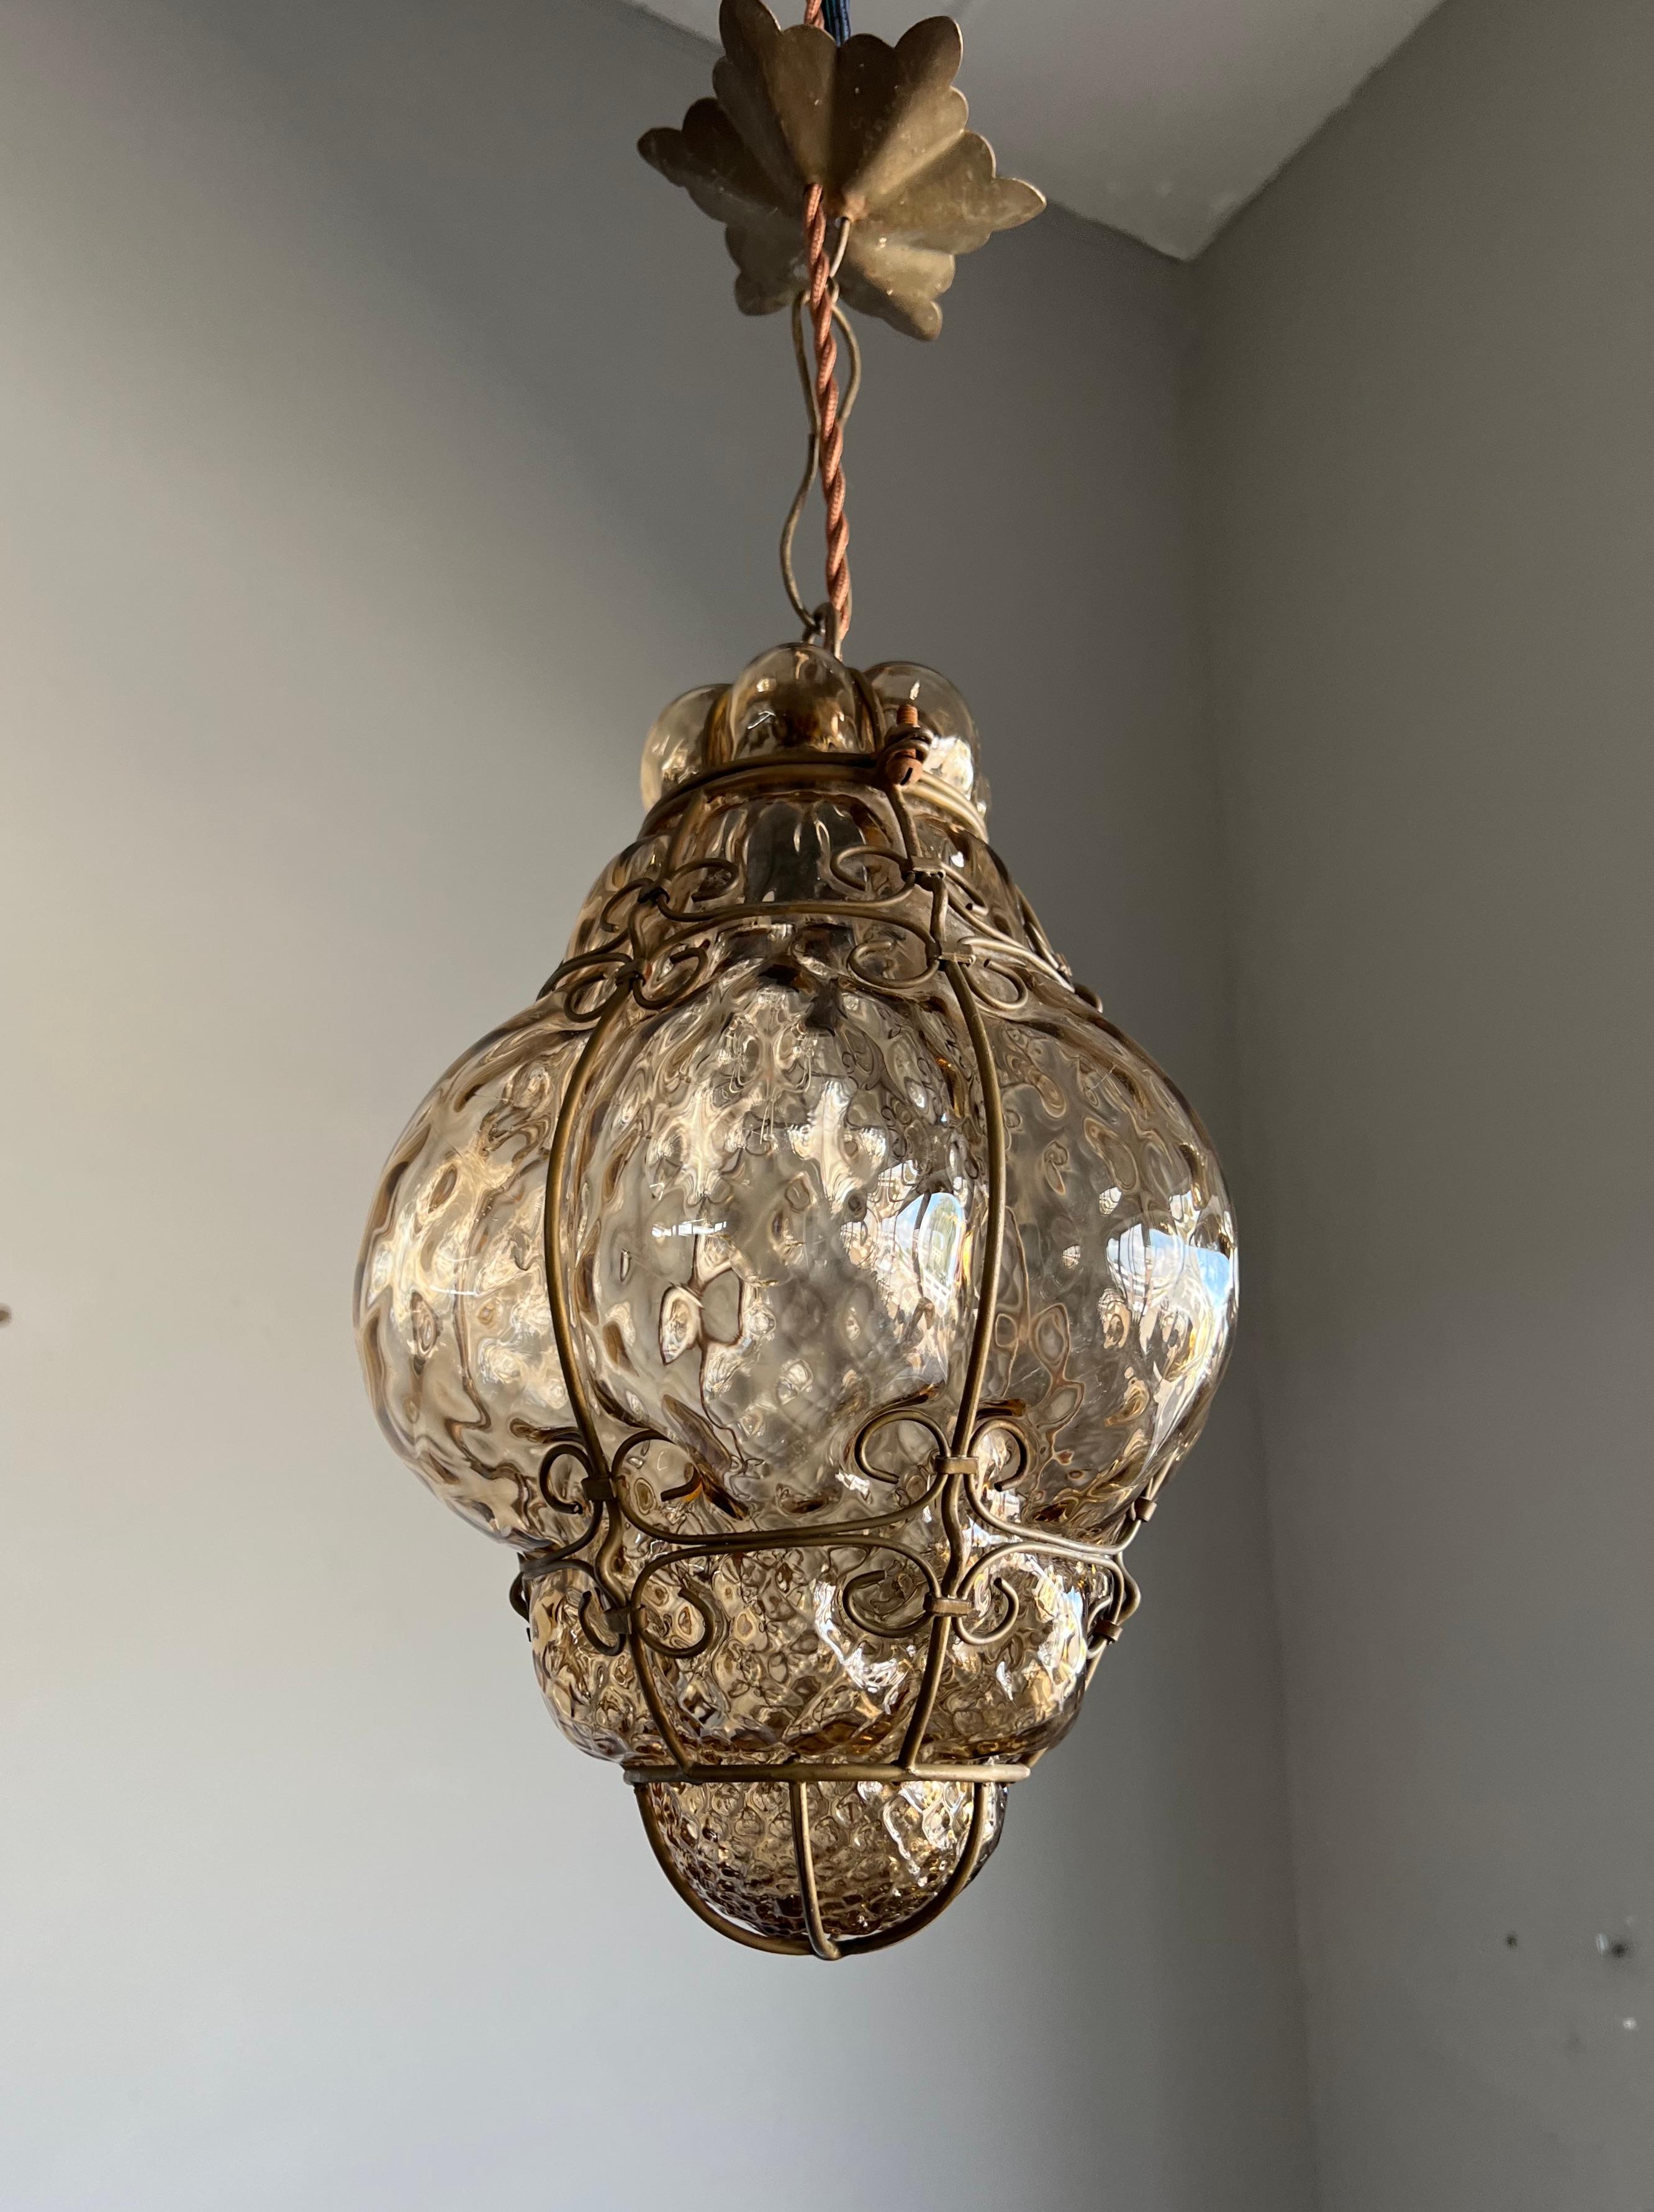 Small Antique Venetian Mouth Blown Smoked Glass Art in Iron Frame Pendant Light For Sale 8